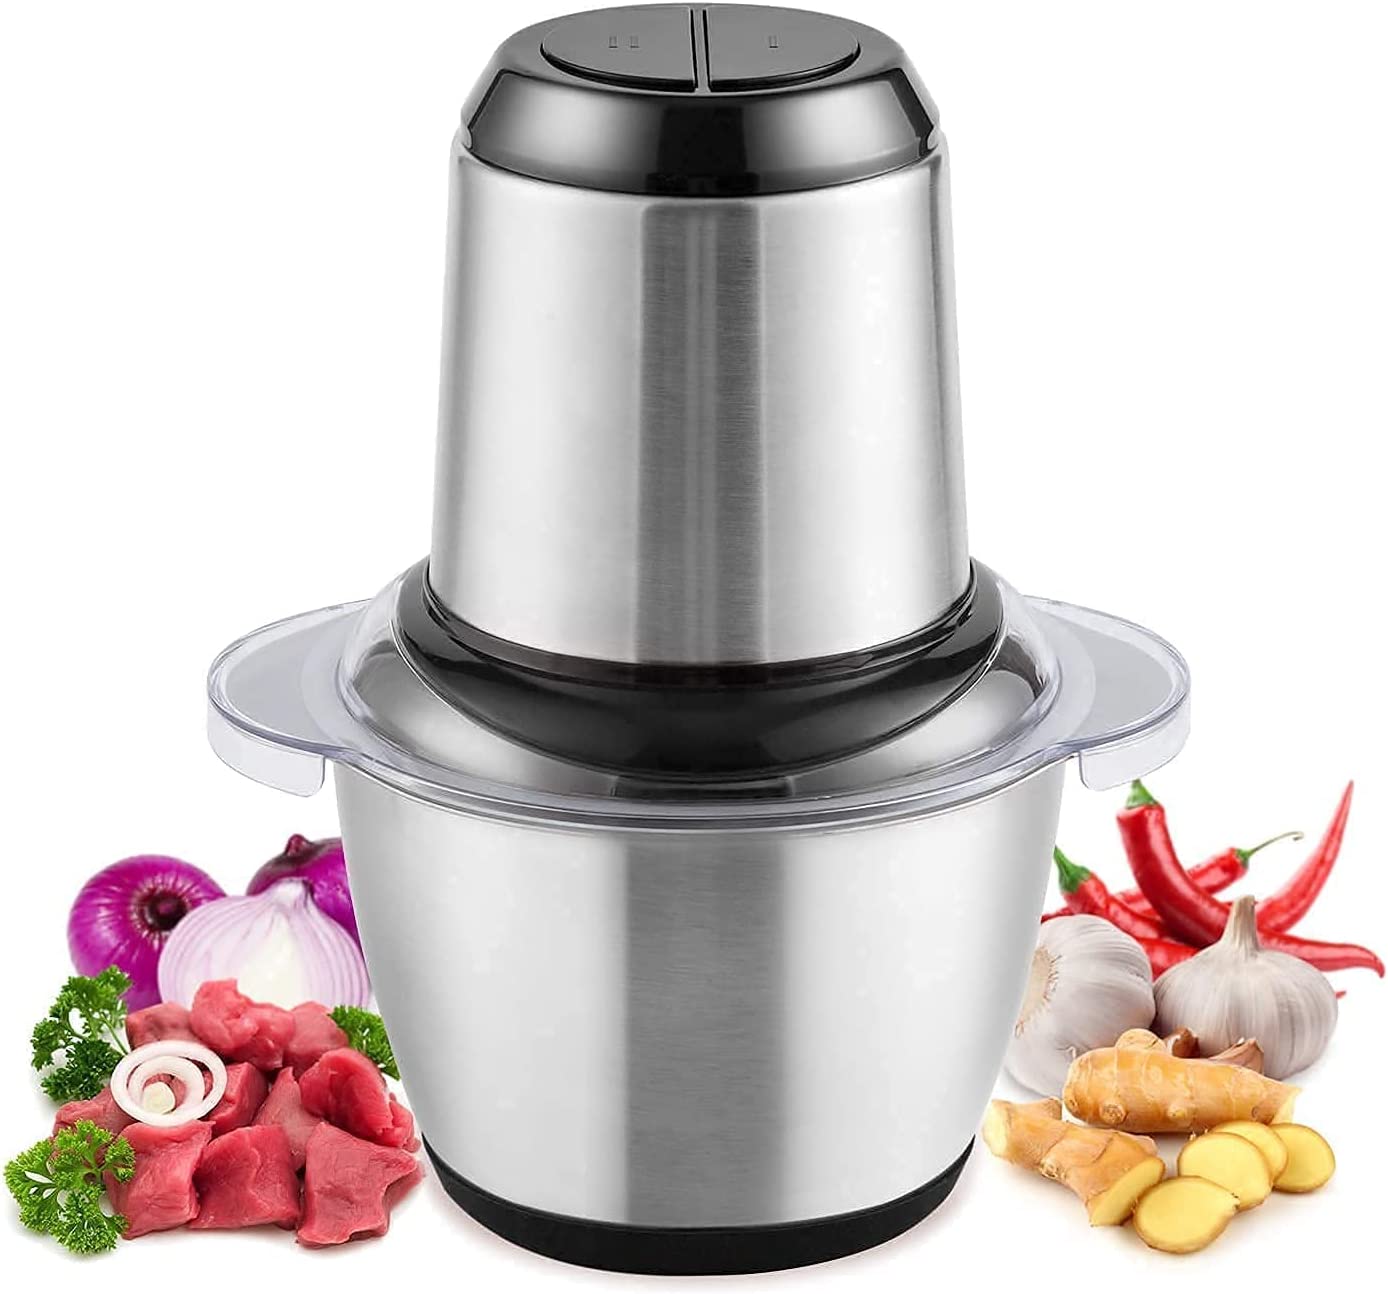 3 Litre Capacity Extra Power Stainless Steel Electric Meat & Food Grinder